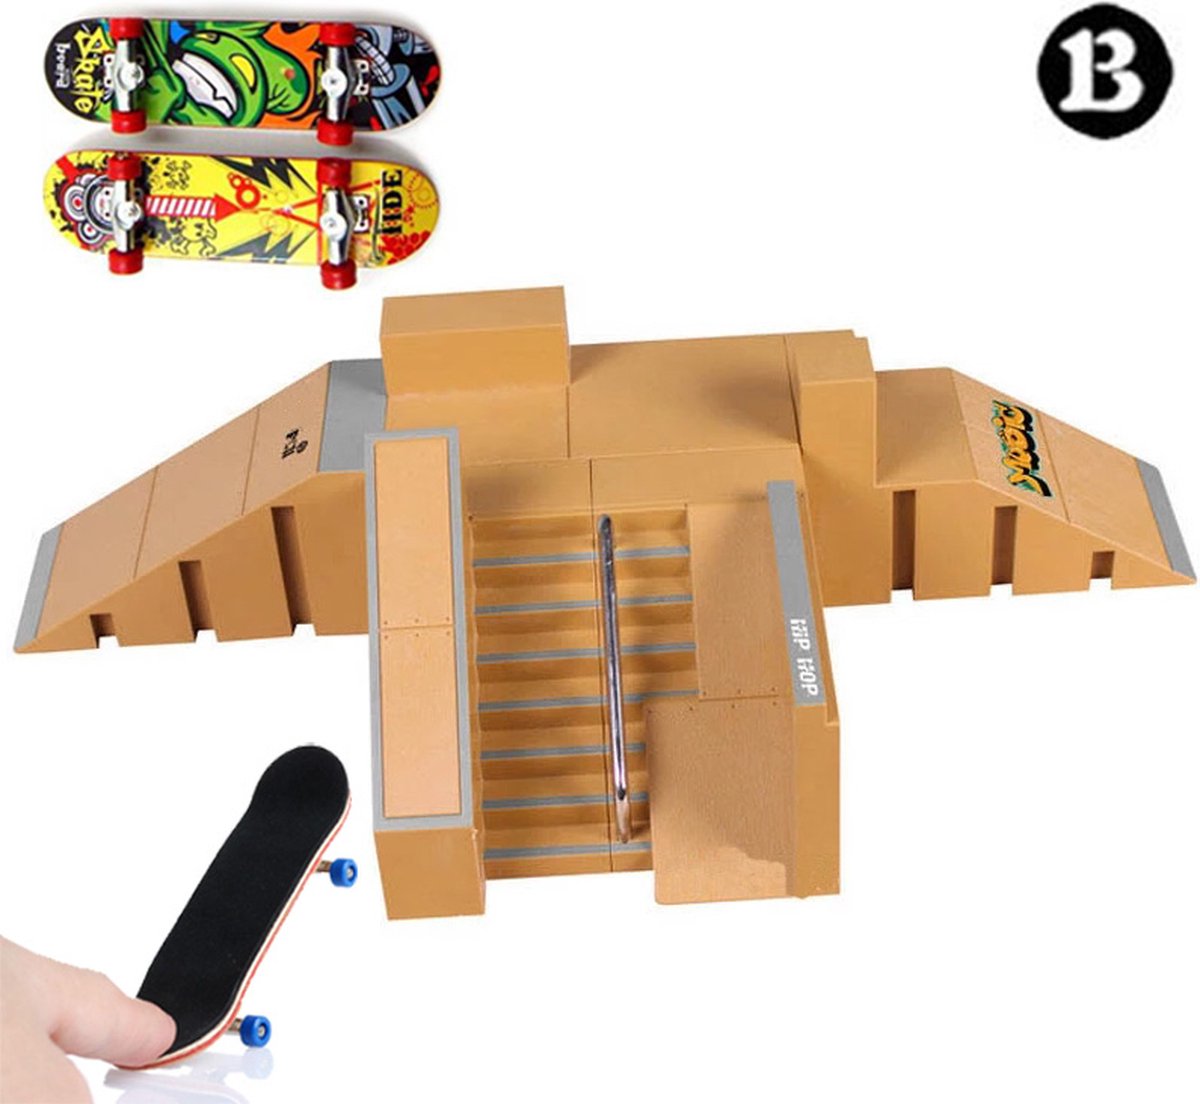 Happy products fingerboard skatepark (B) - finger skateboard - vinger skateboard - skate ramp - speelgoed cadeau - Happy products